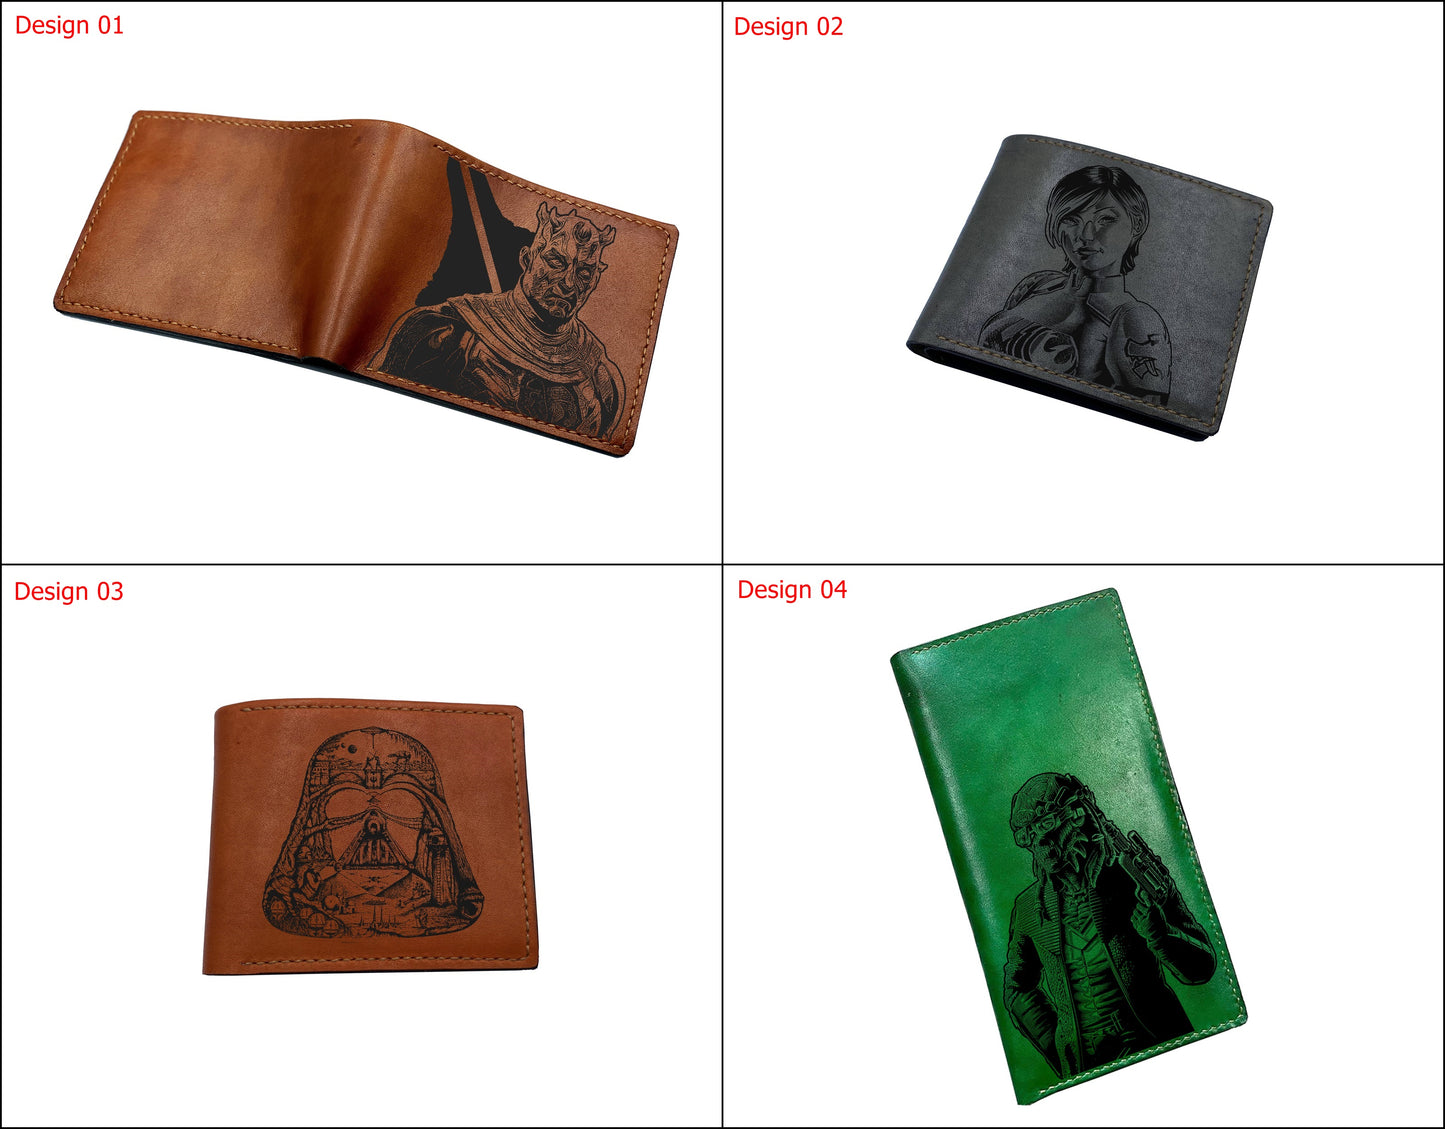 Starwars leather handmade wallet, starwars characters modern art, leather gift for men, wallet for husband